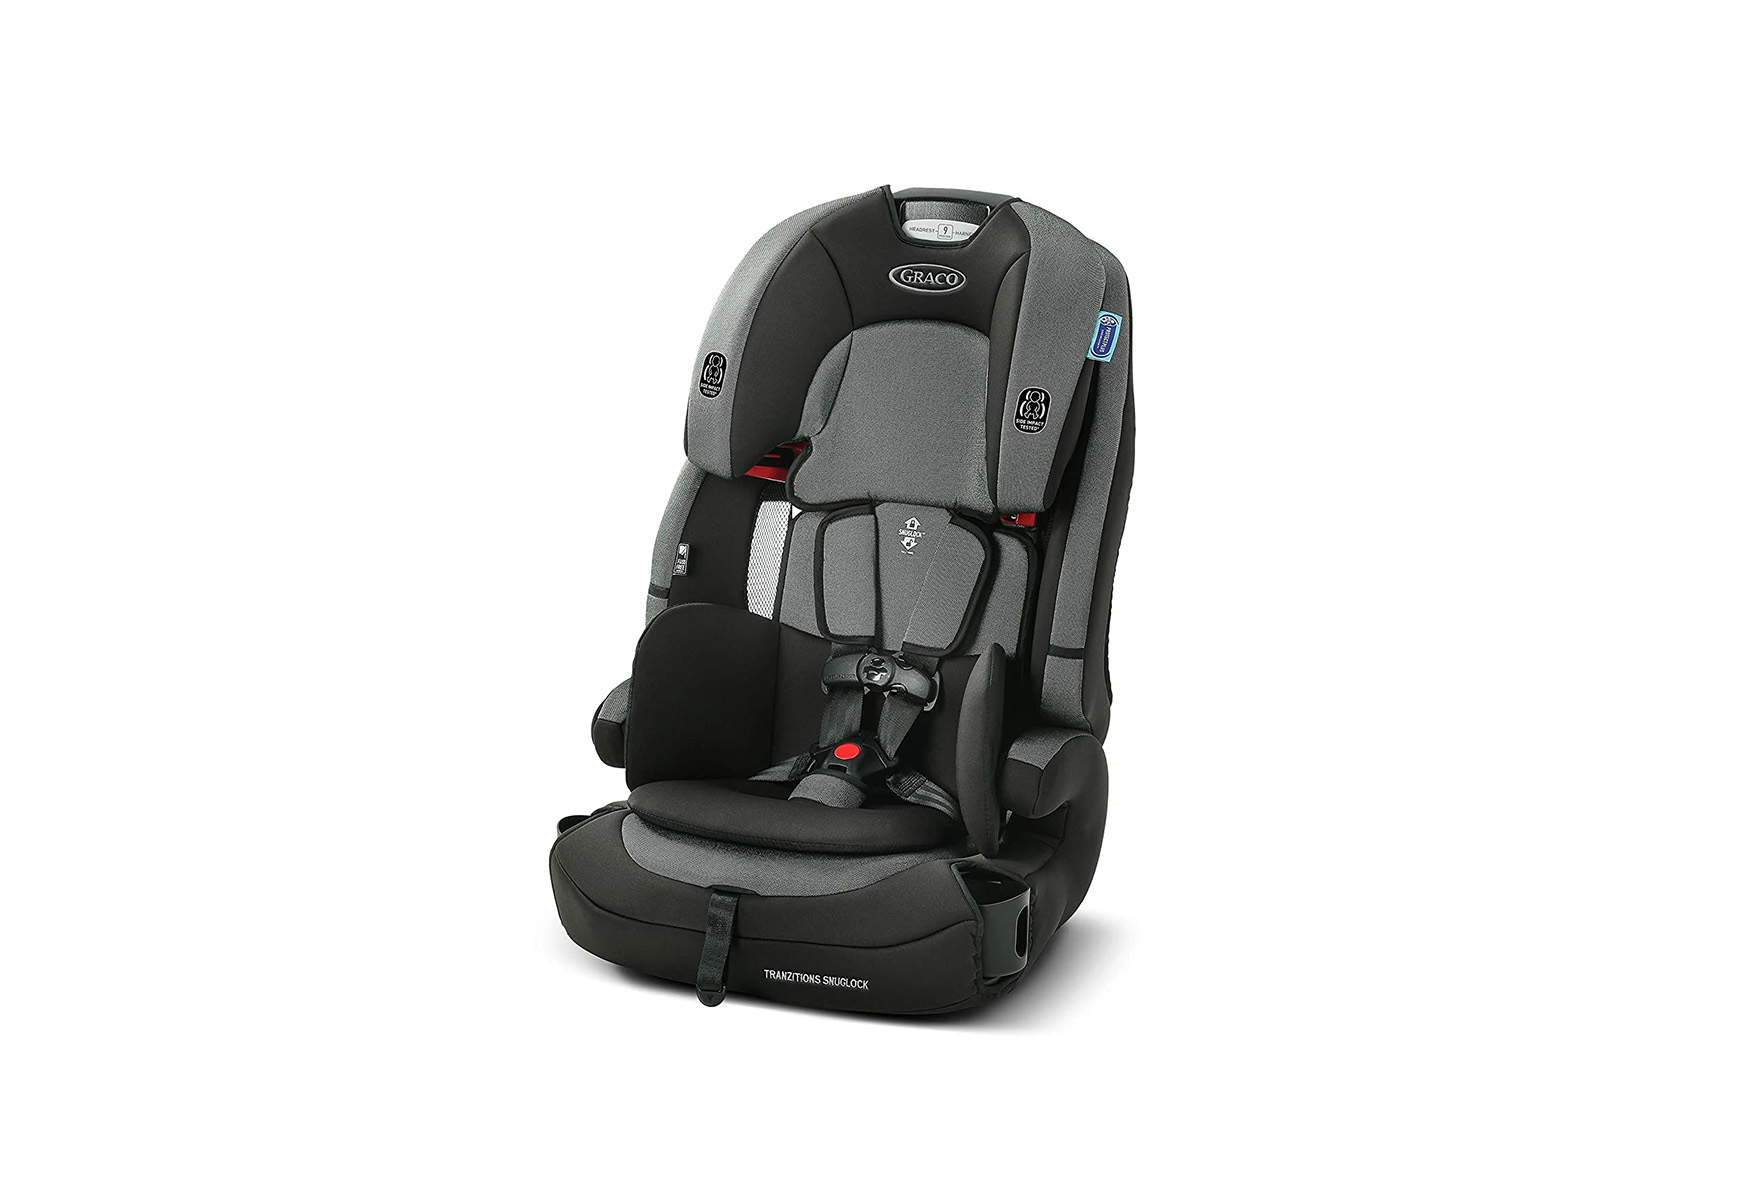 Harness booster car seat for a toddler 